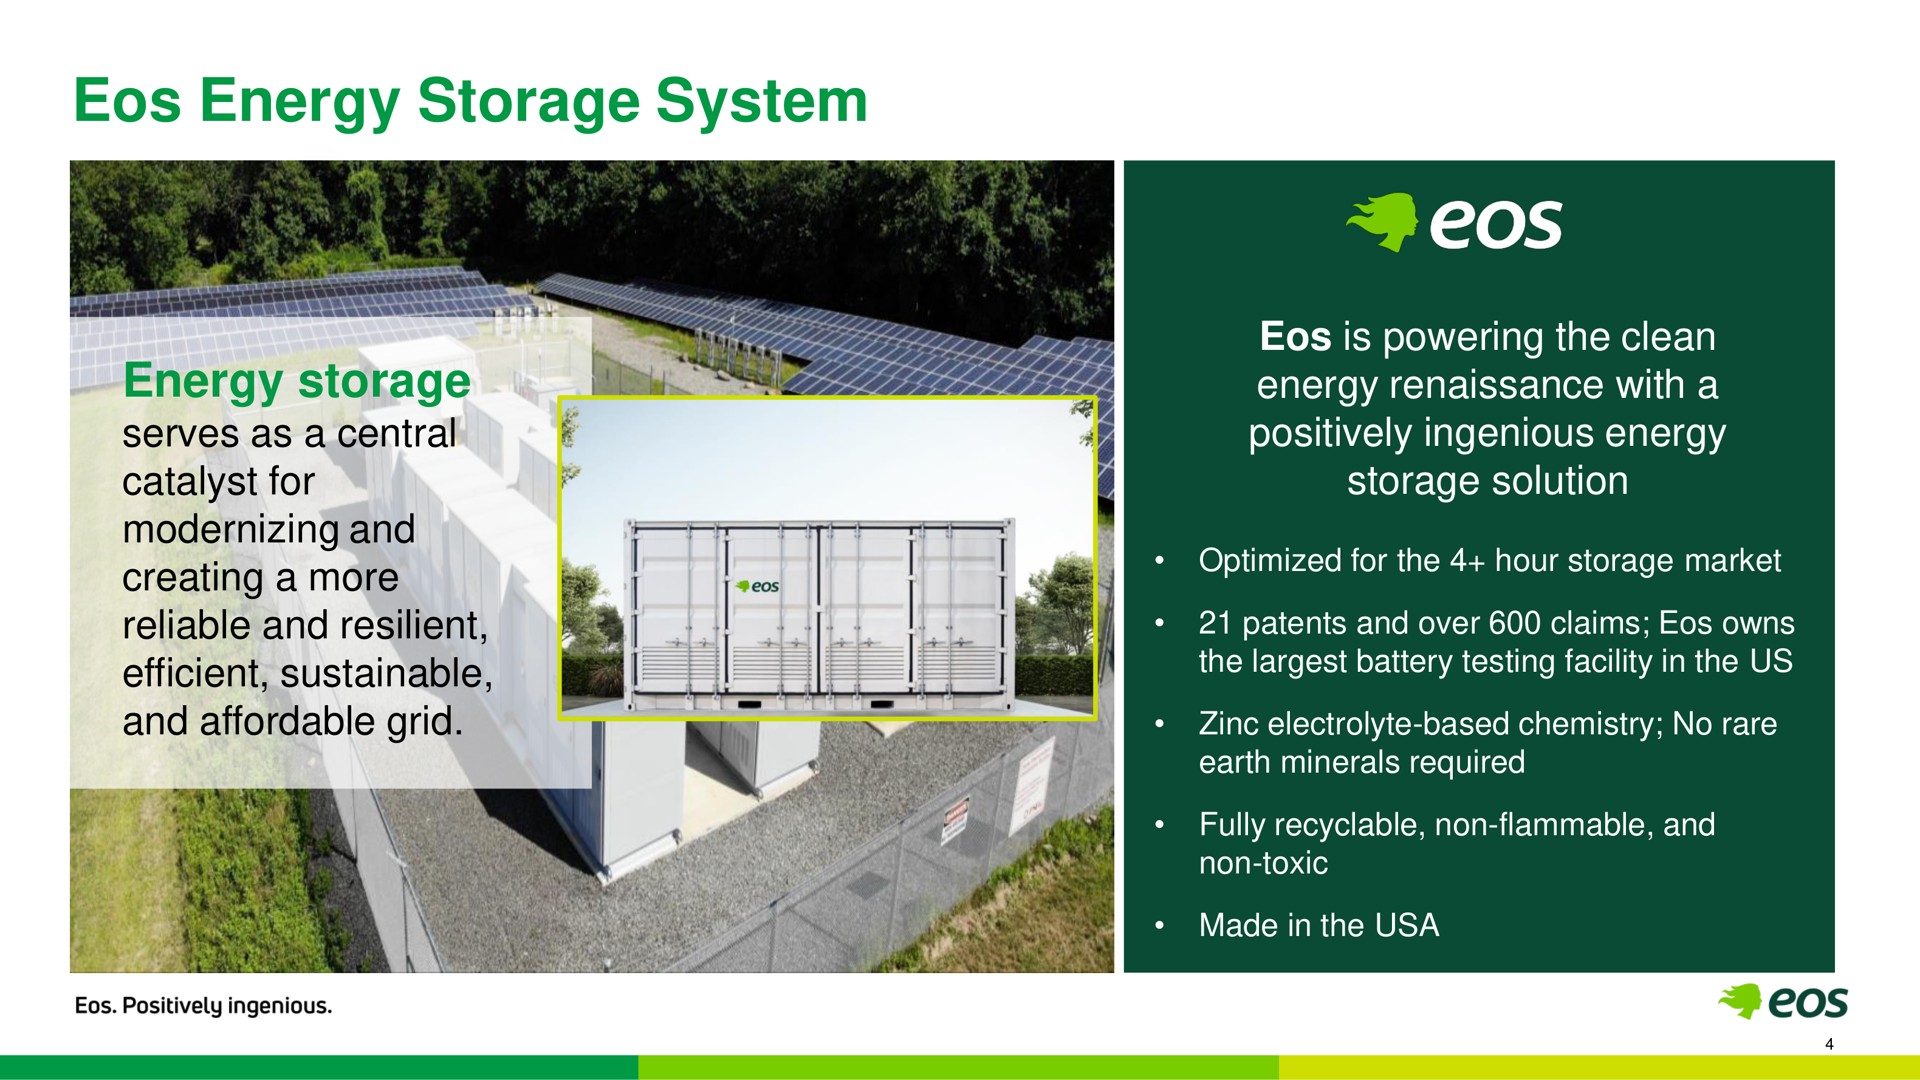 energy storage system energy storage serves as a central catalyst for modernizing and creating a more reliable and resilient efficient sustainable and affordable grid is powering the clean energy renaissance with a positively ingenious energy storage solution optimized for the hour storage market patents and over claims owns the battery testing facility in the us zinc electrolyte based chemistry no rare earth minerals required fully non flammable and non toxic made in the i gee pete toe | Eos Energy